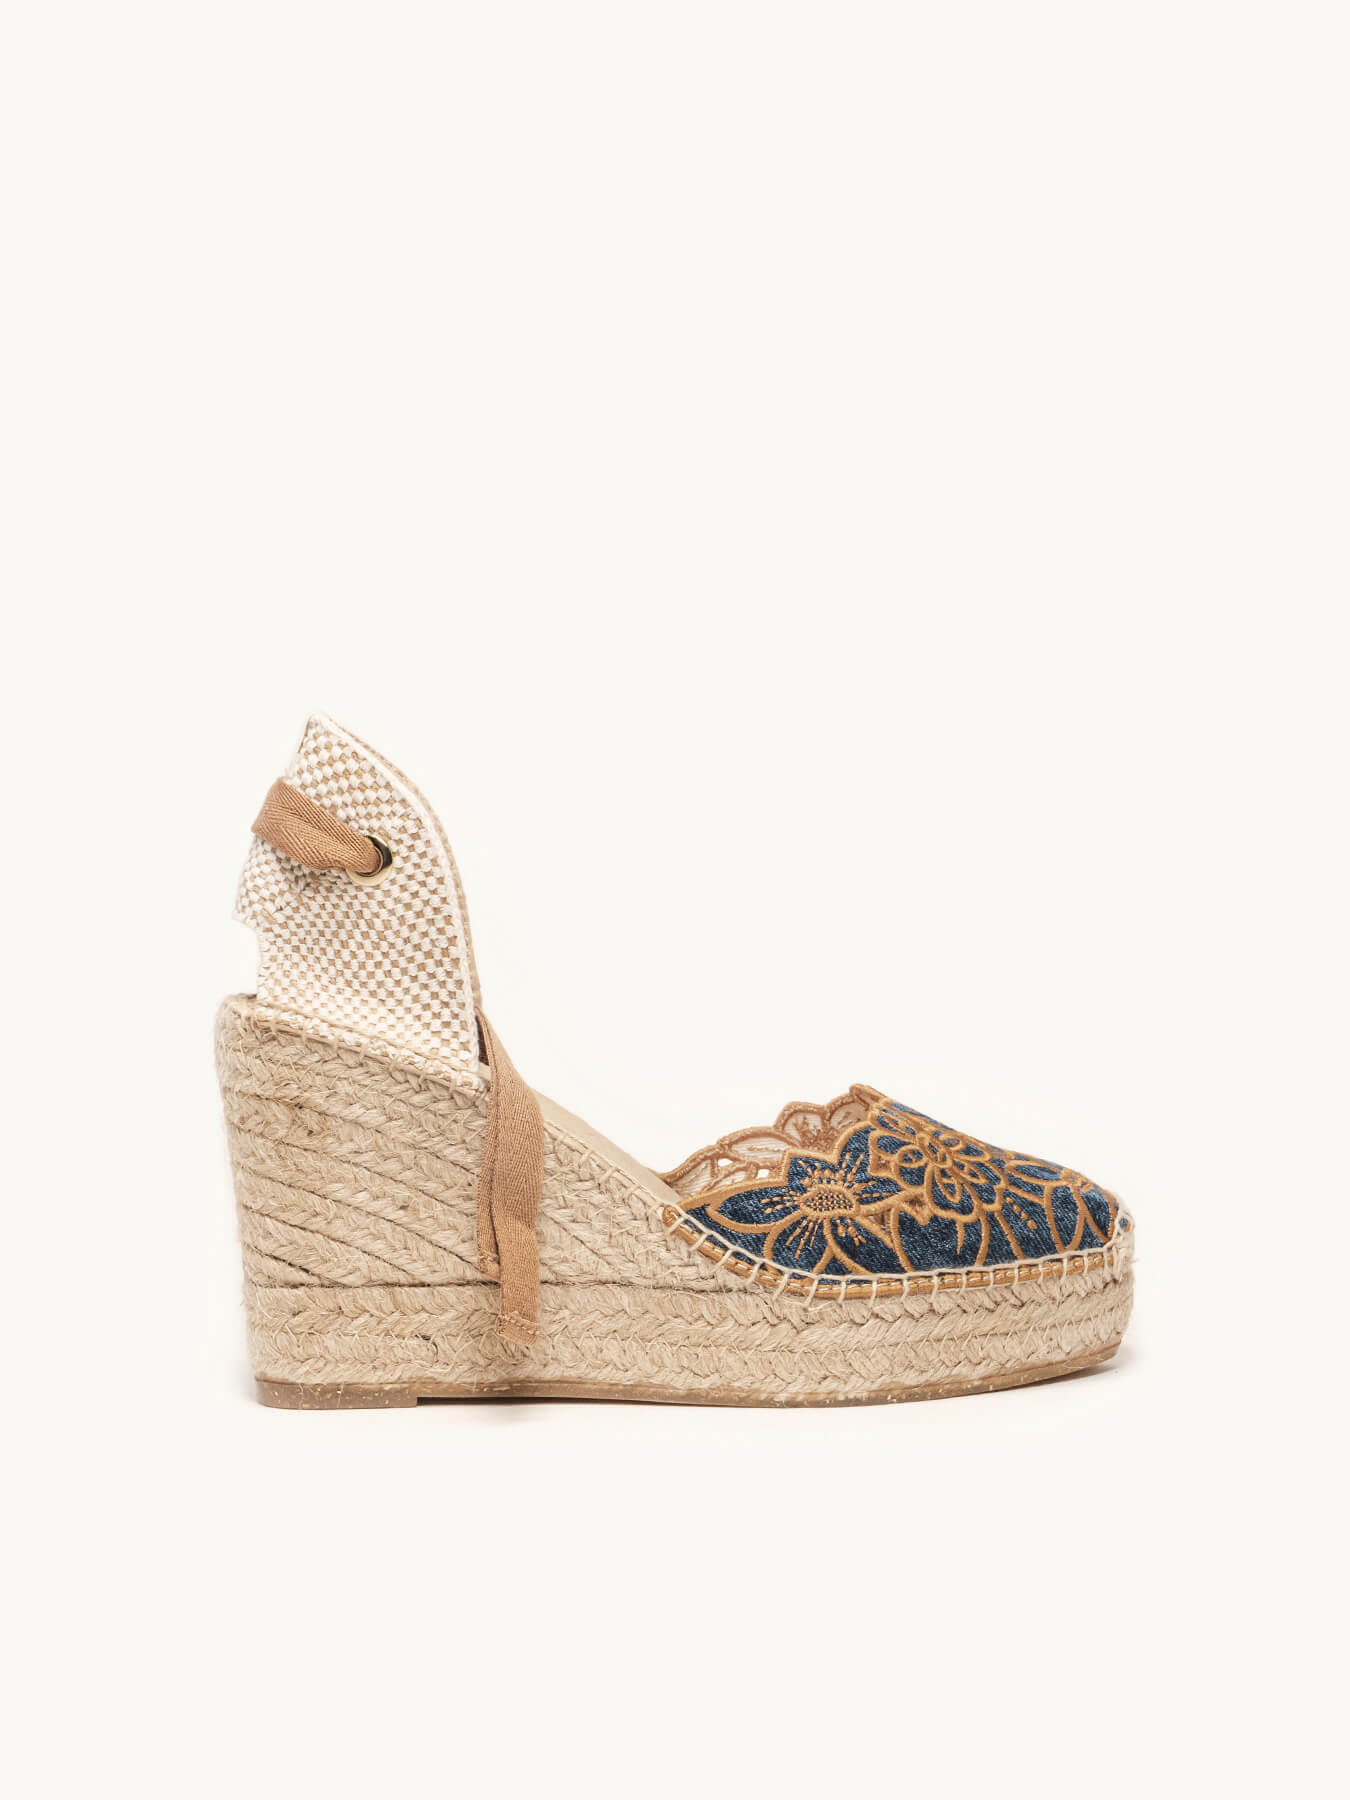 Romero High Wedge Wild Embroidery Blue Jeans